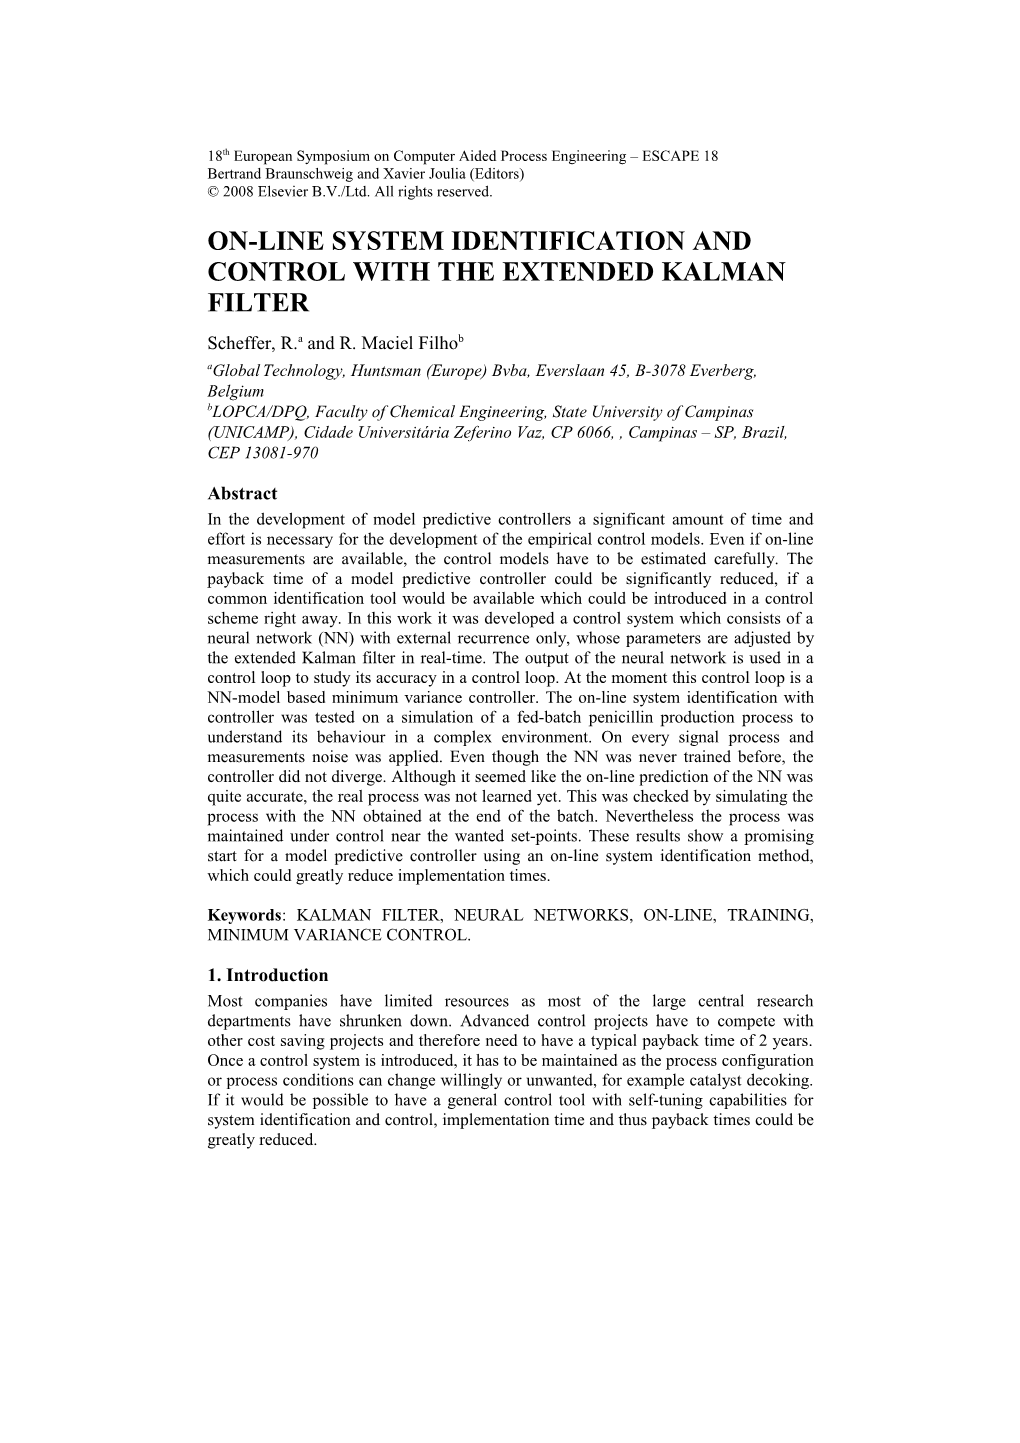 On-Line System Identification and Control with the Extended Kalman Filter